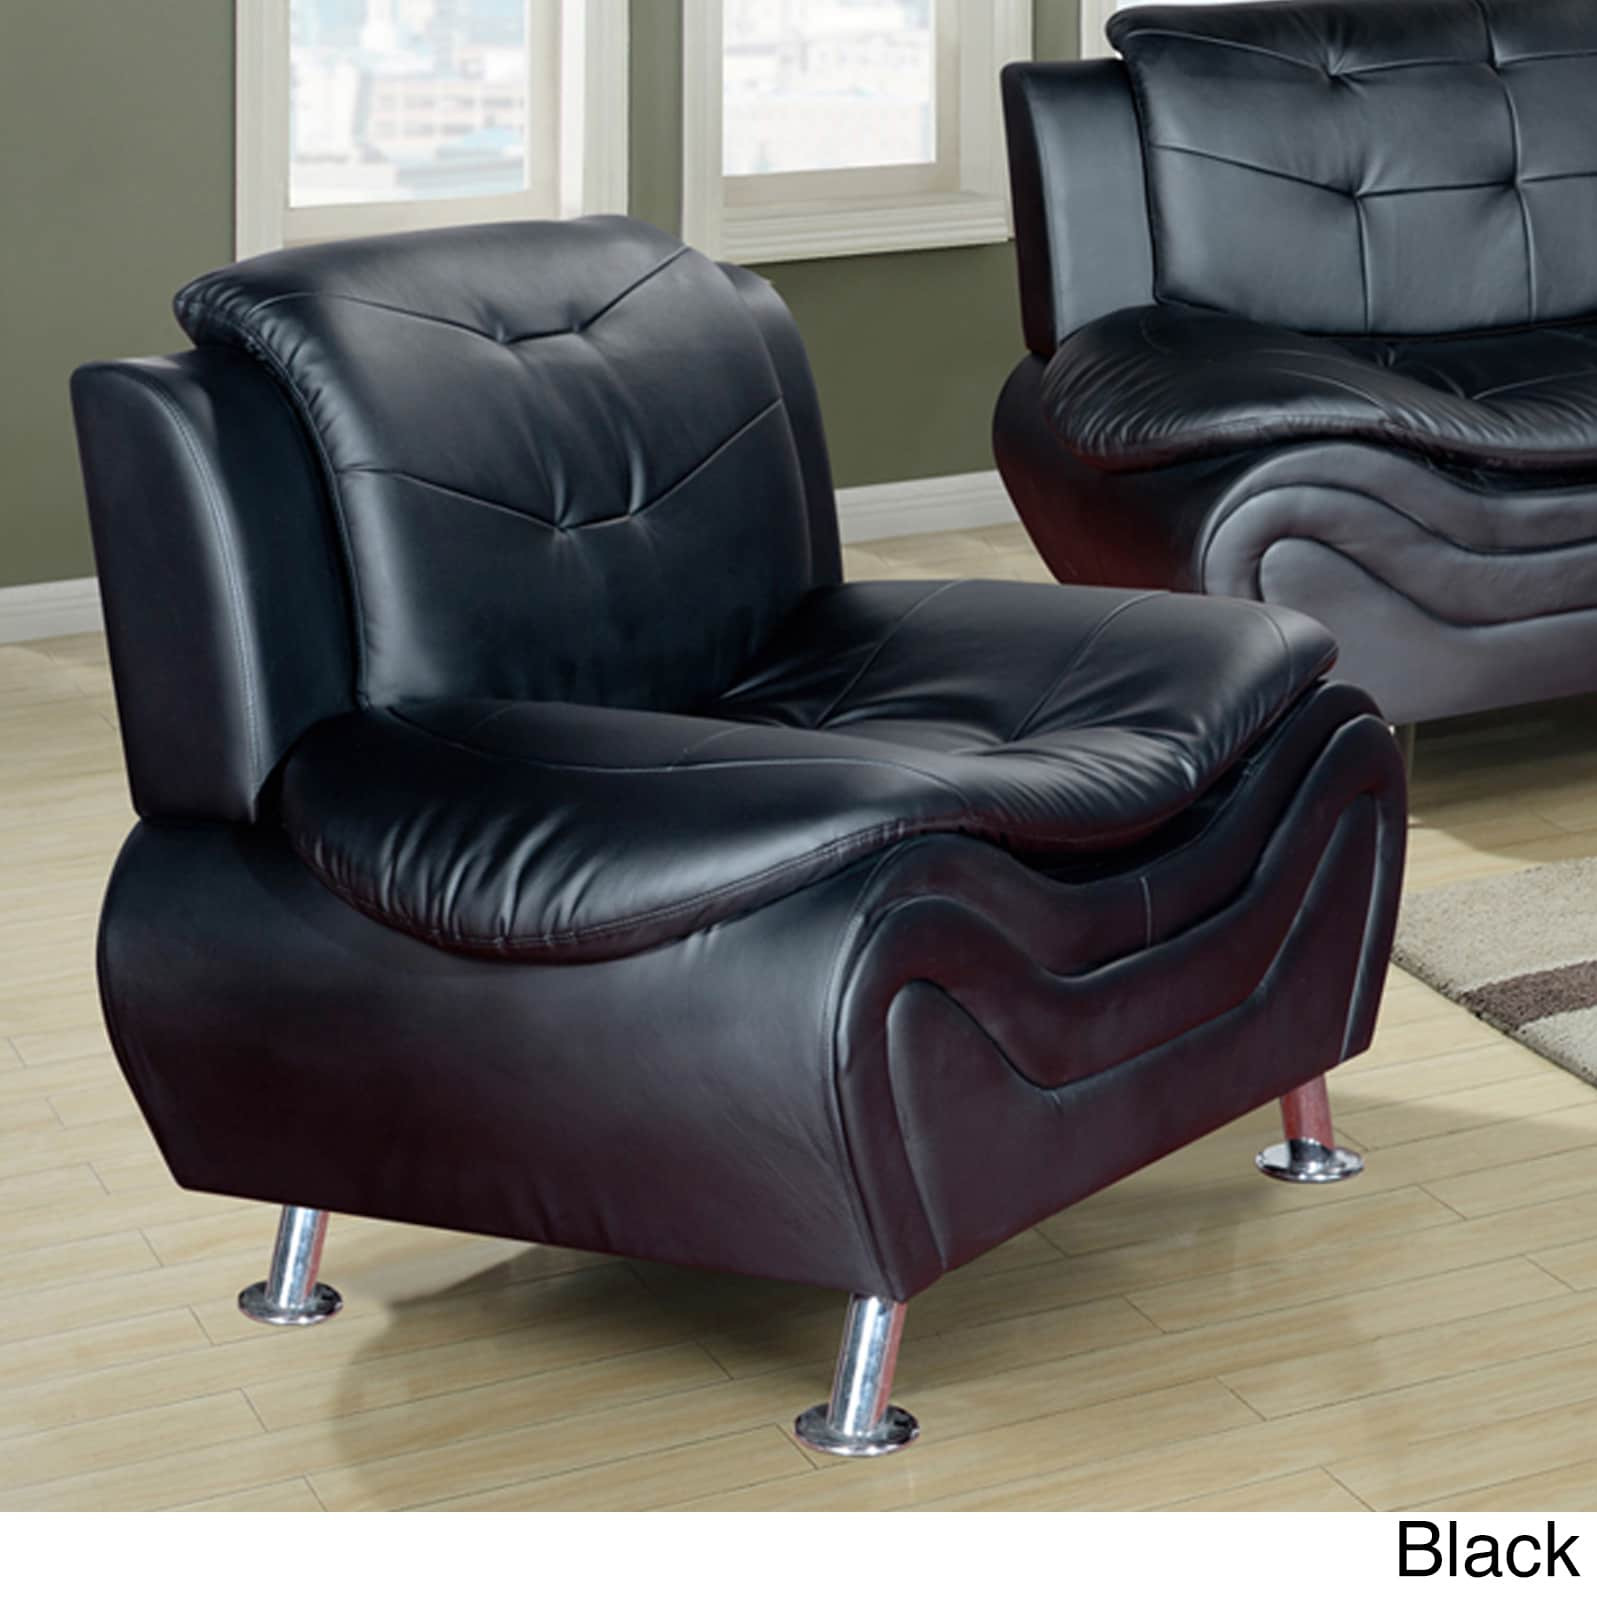 Living Room Chairs Walmart
 Ellena Black Red White Faux Leather Wood Modern Living